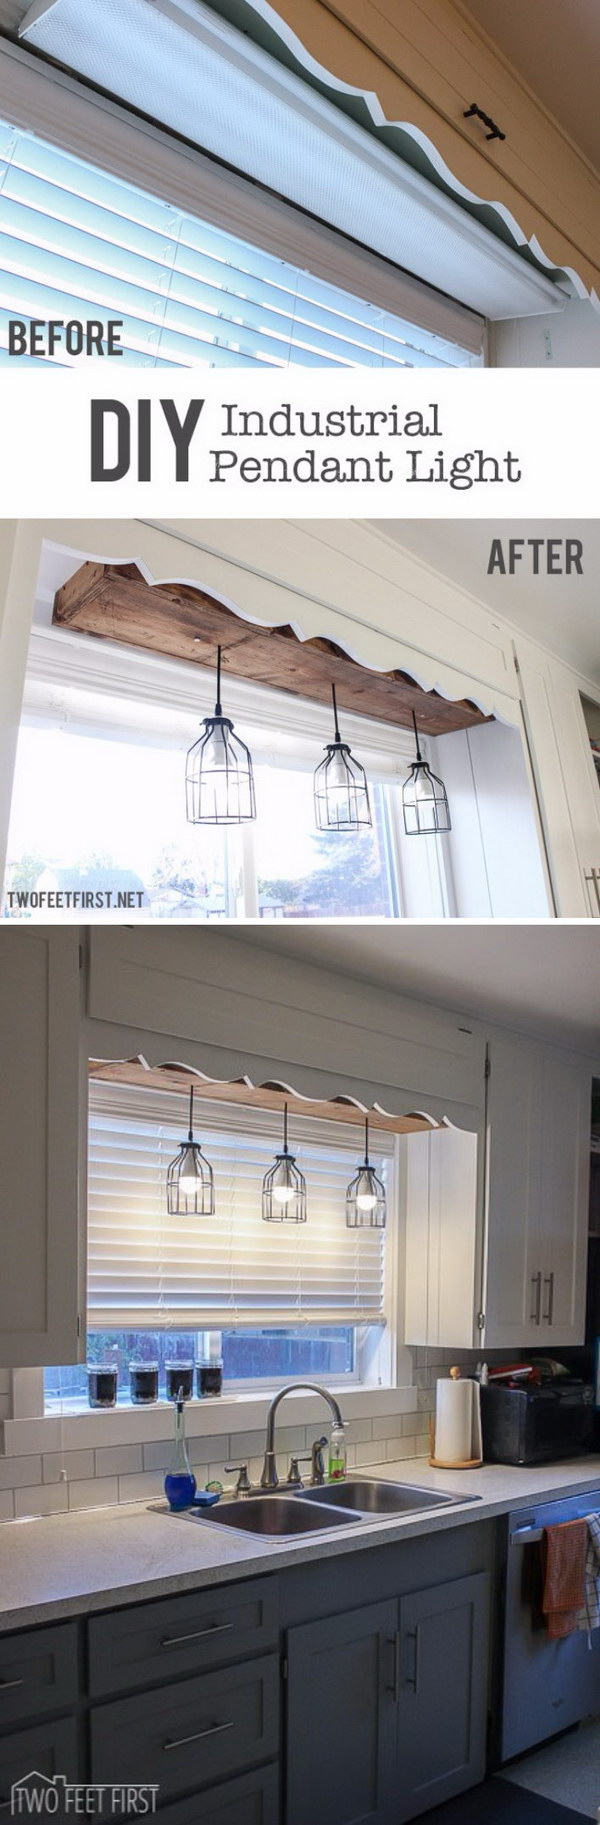 Make the Plain Space Fun Using a DIY Pendant Cage Light with a Wooden Box. 